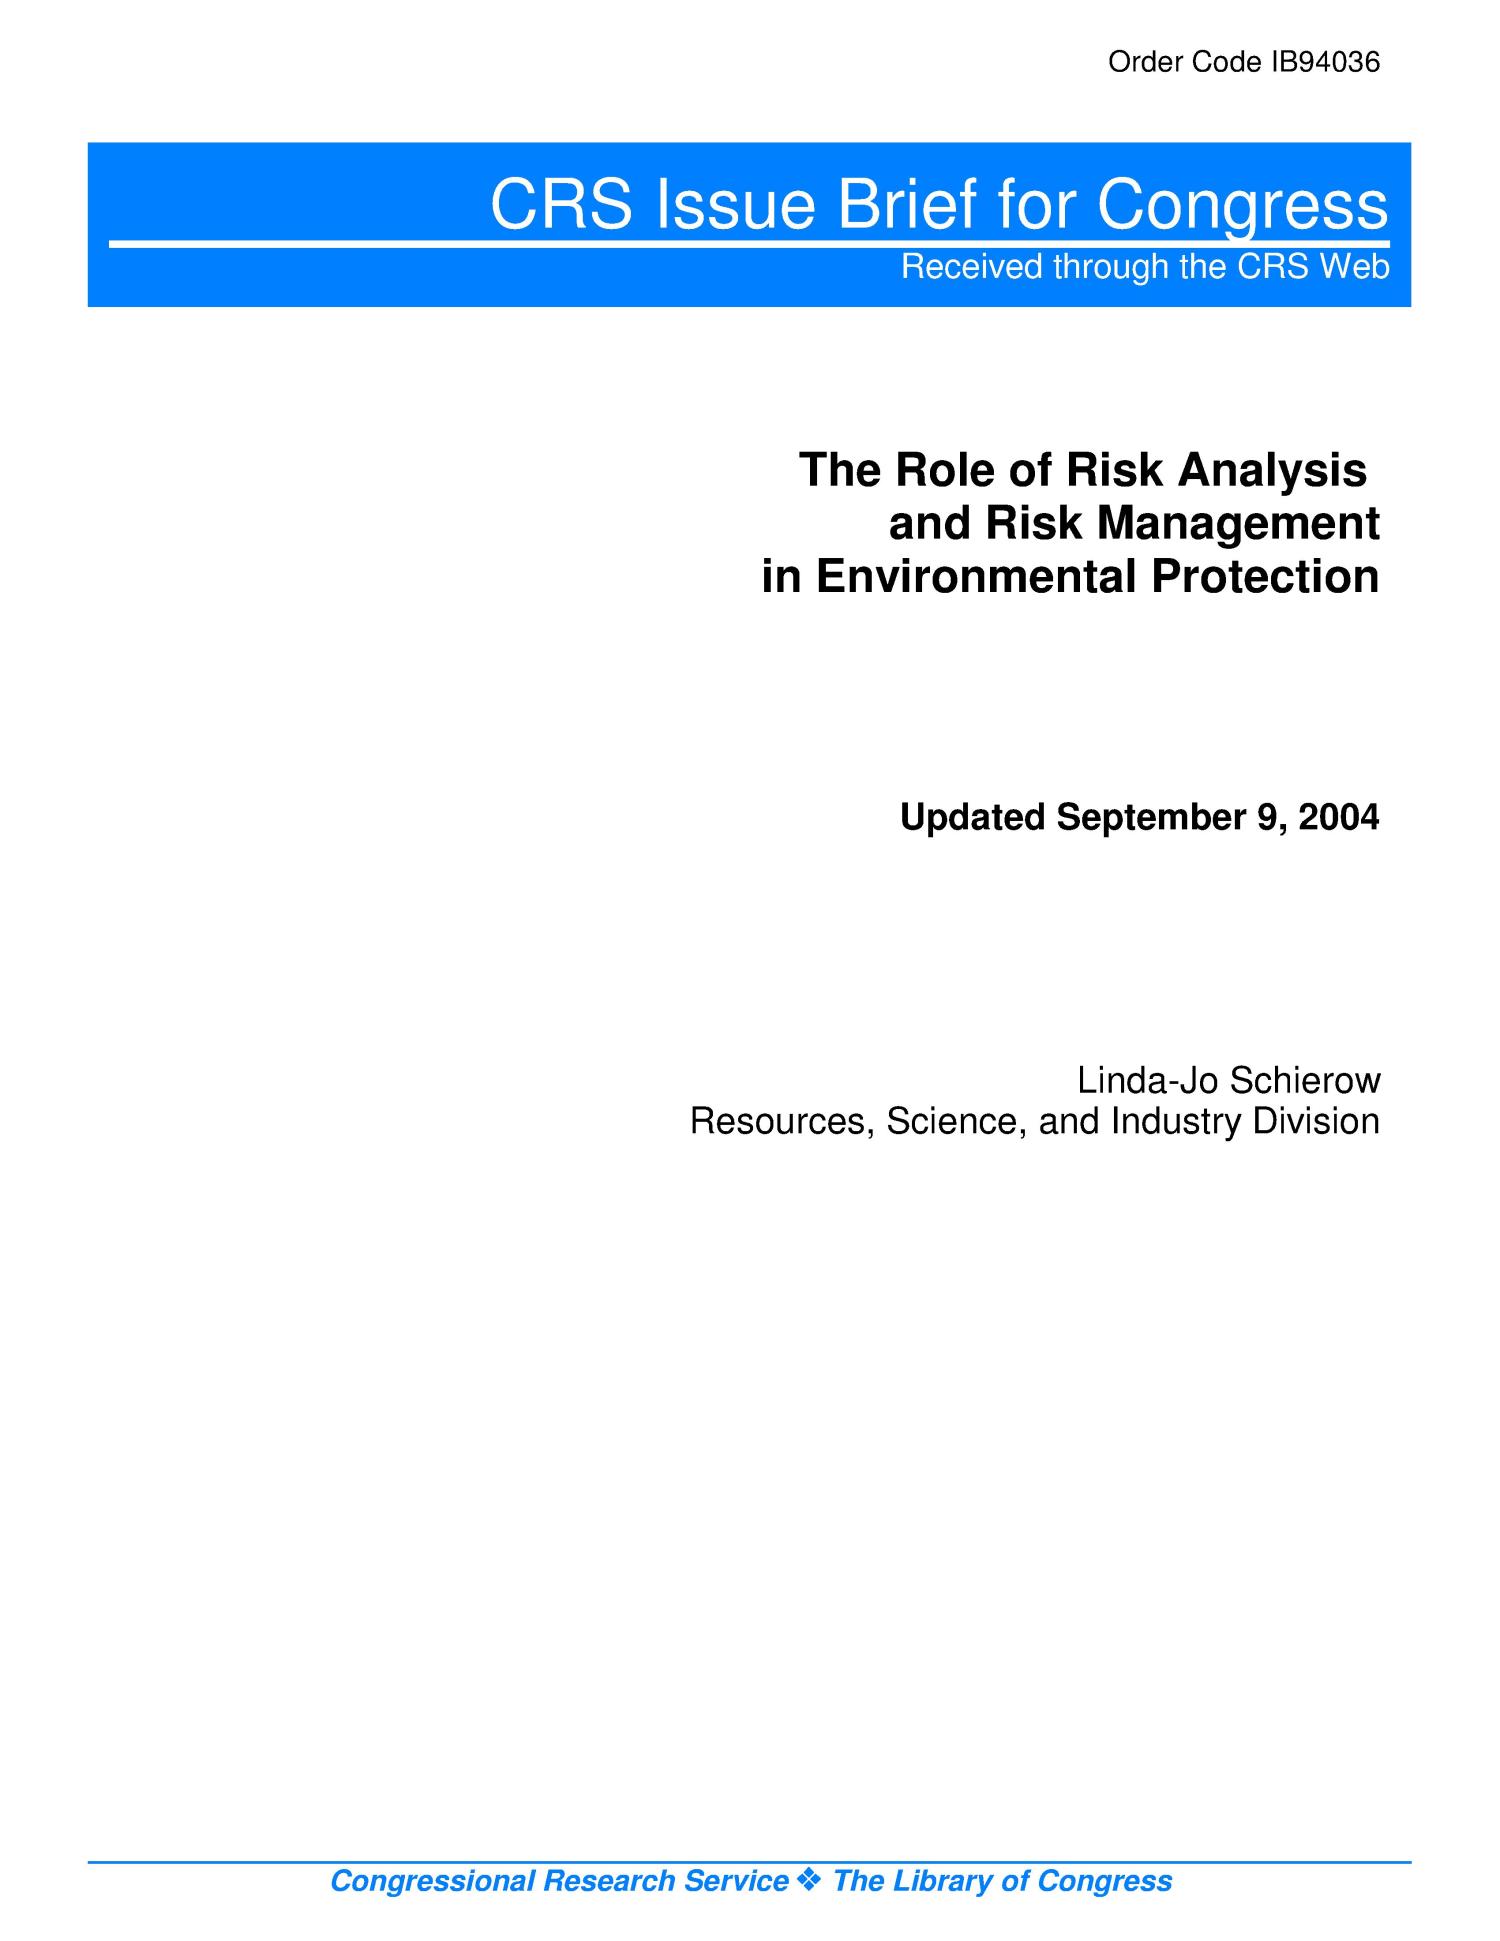 The Role of Risk Analysis and Risk Management in Environmental Protection
                                                
                                                    [Sequence #]: 1 of 15
                                                